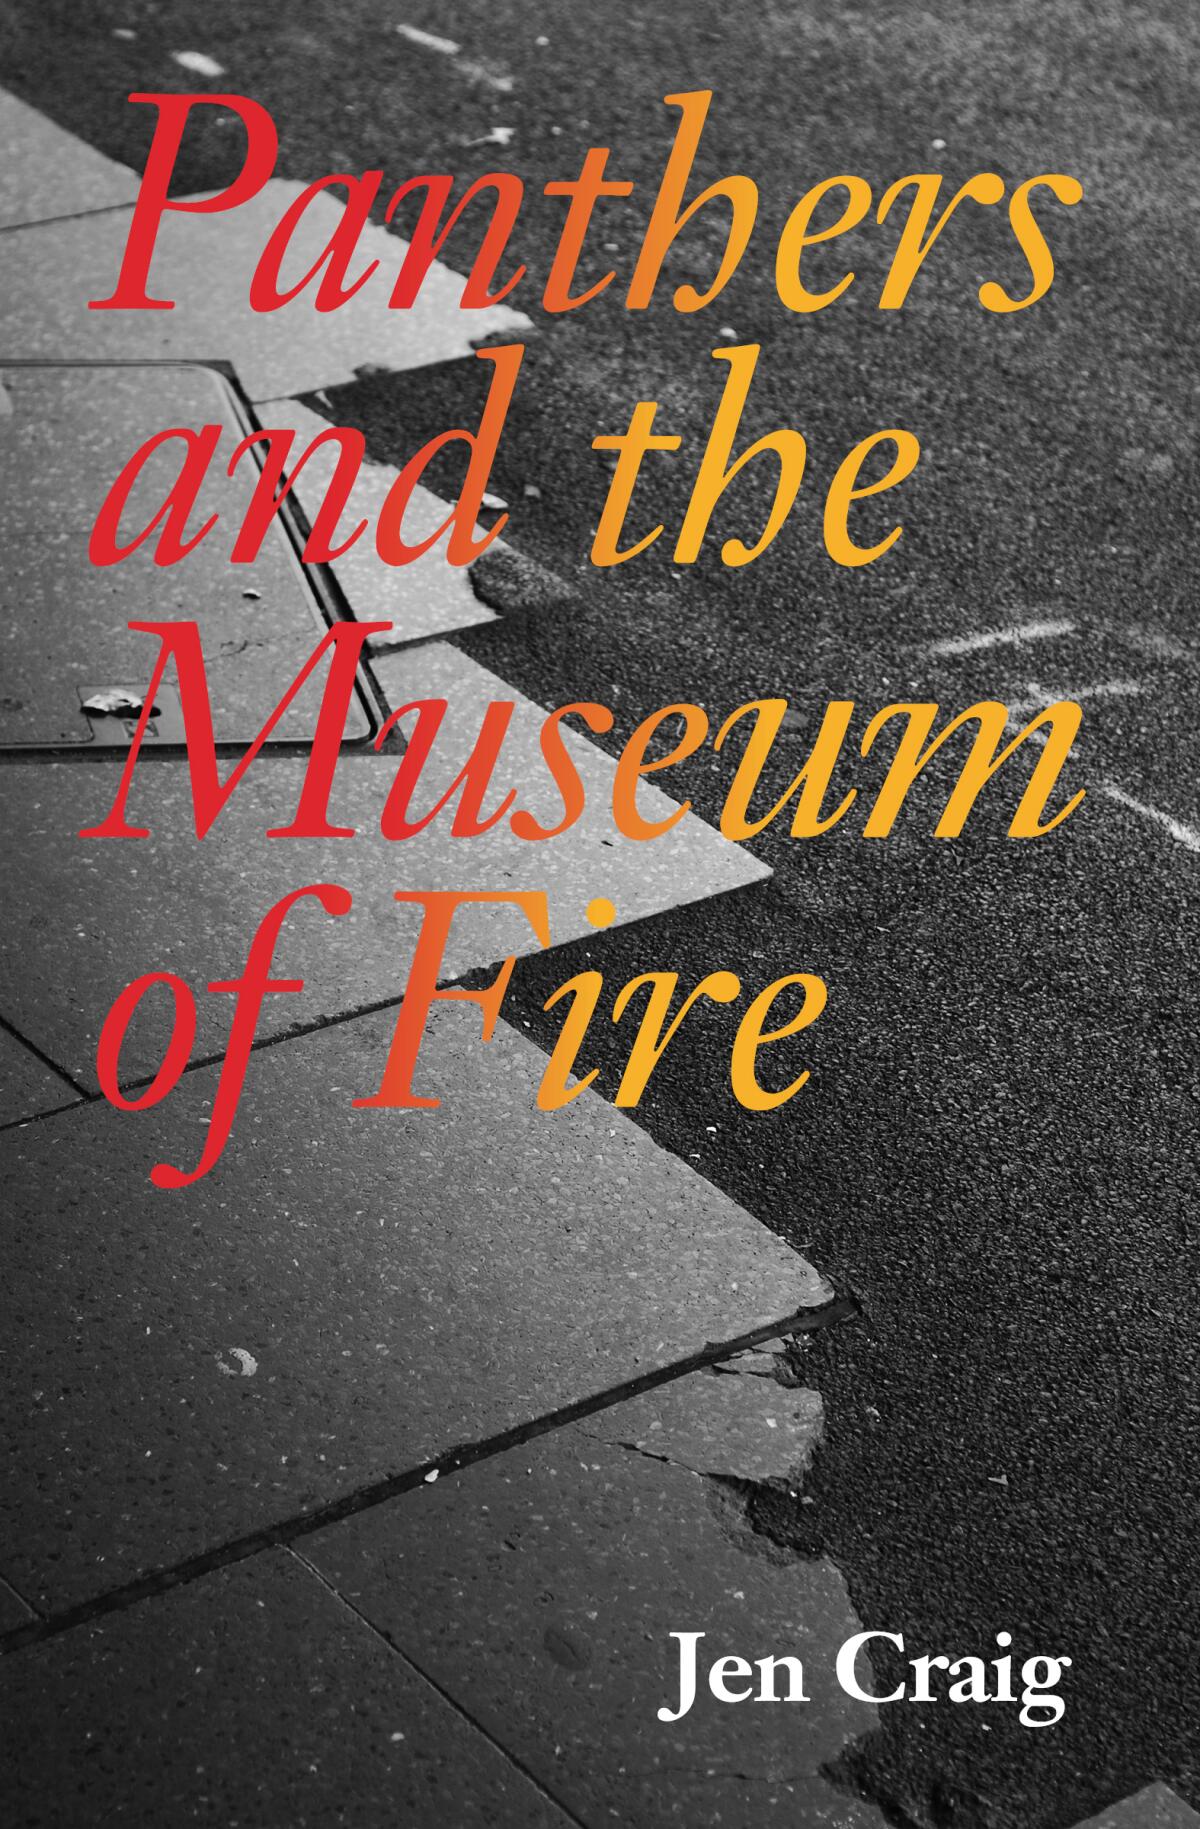 "Panthers and the Museum of Fire" by Jen Craig